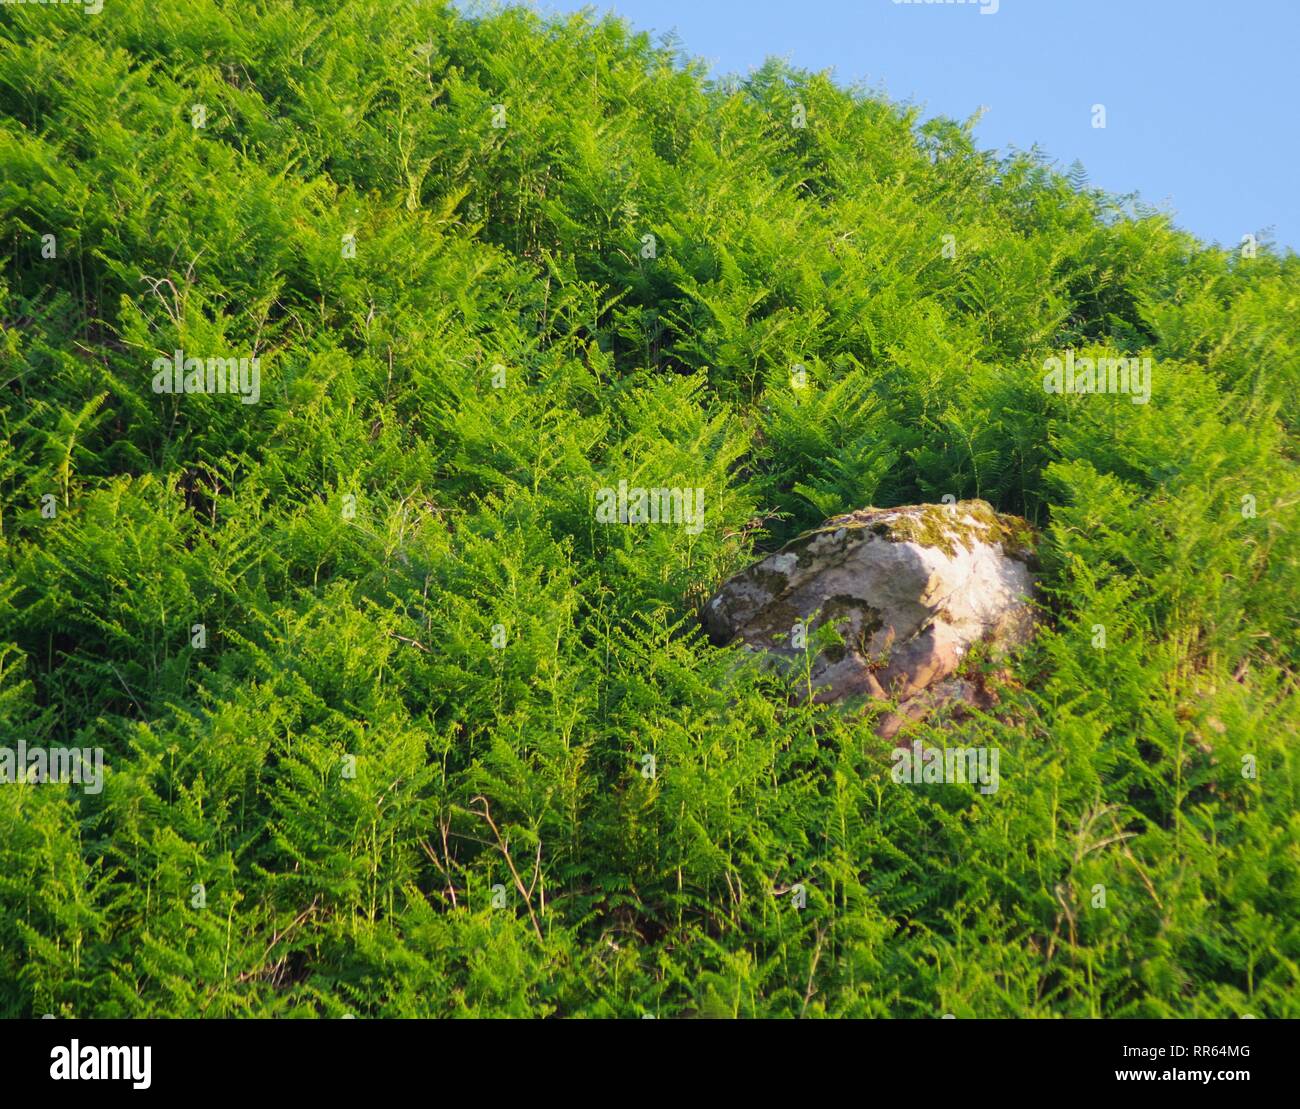 Vegetated Cliff with a Swathe of Vivid Green Bracken Surrounding a Sandstone Boulder on a Sunny Summer's Evening. St Andrew's, Fife, Scotland, UK. Stock Photo